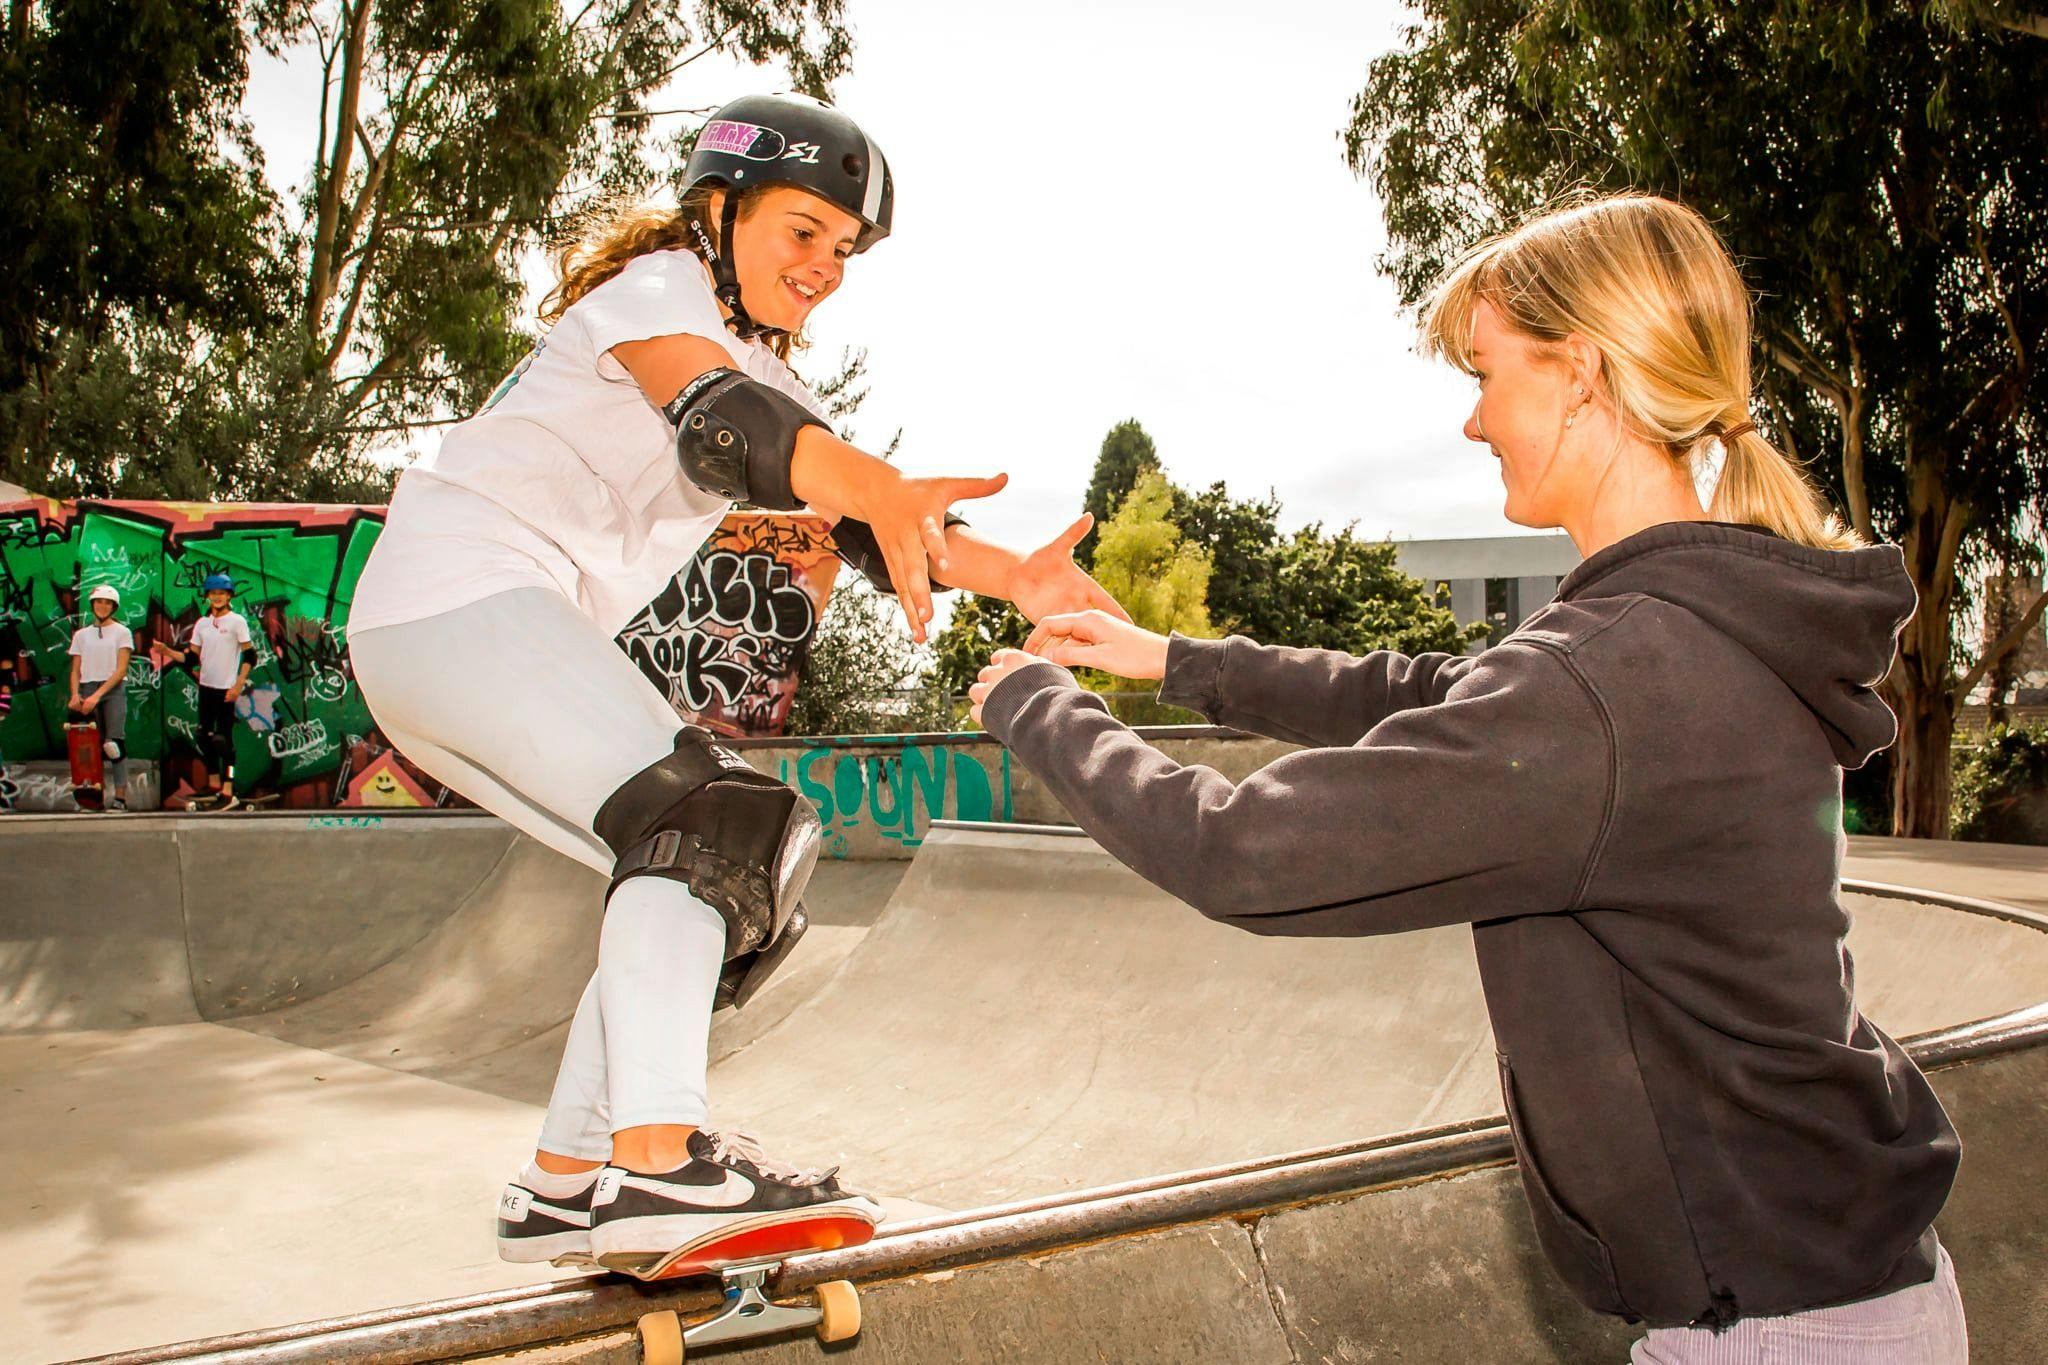 young girl learning to skaeboard at a skate park, photographed by liam mitchell